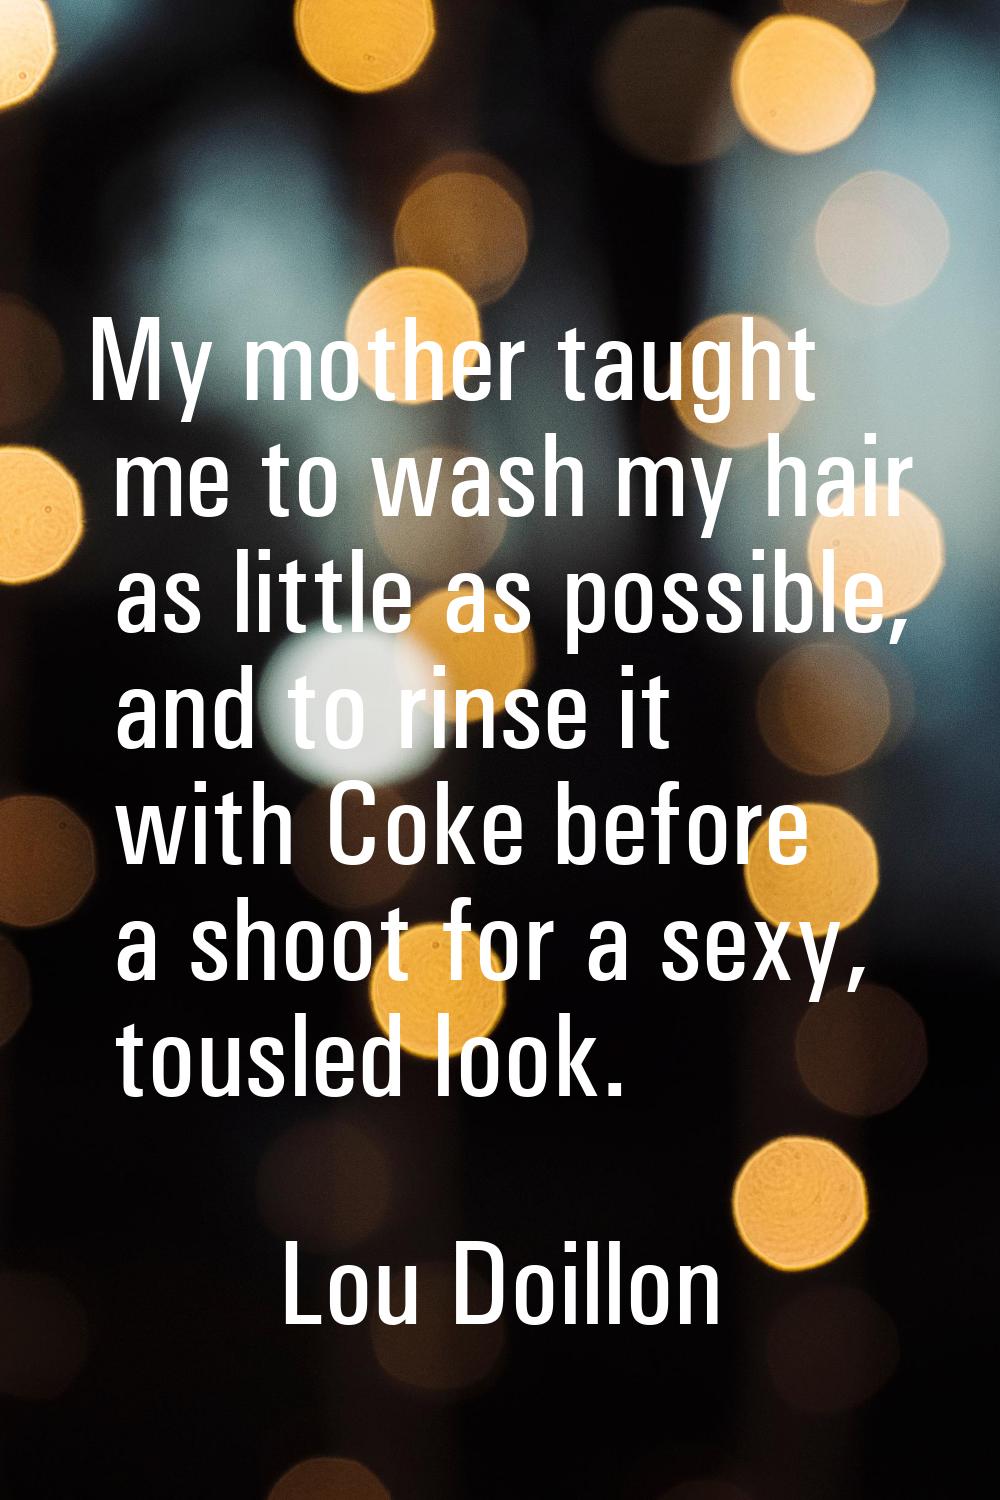 My mother taught me to wash my hair as little as possible, and to rinse it with Coke before a shoot